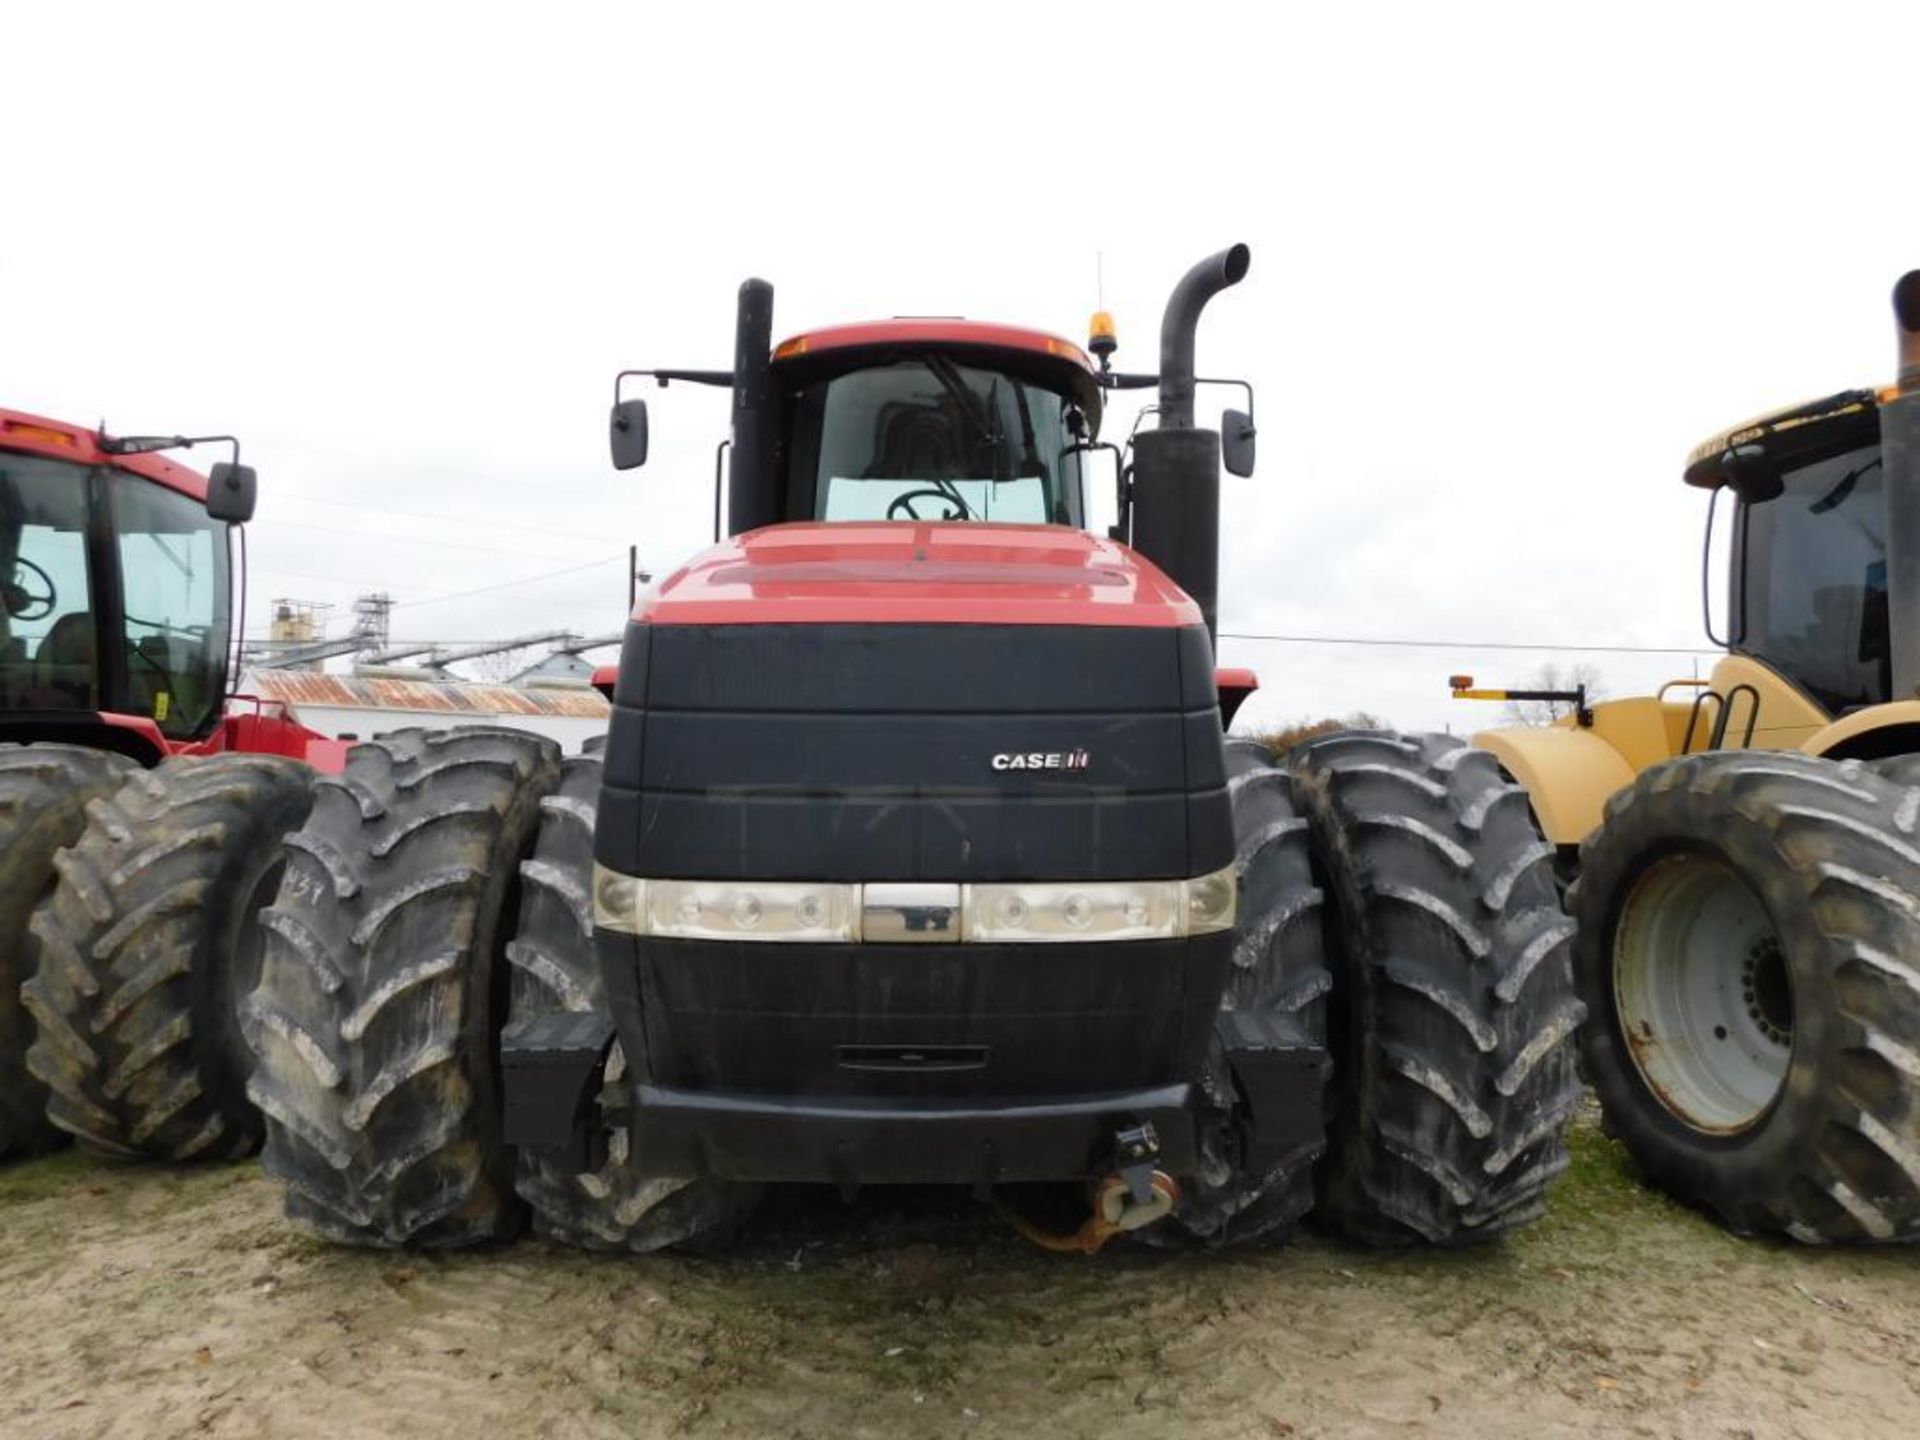 2013 Case-IH Steiger Tractor Model 500S, S/N ZDF139007, 4WD, 6-Cyl. 12.9L 500 HP Engine, 16-Speed F/ - Image 2 of 5